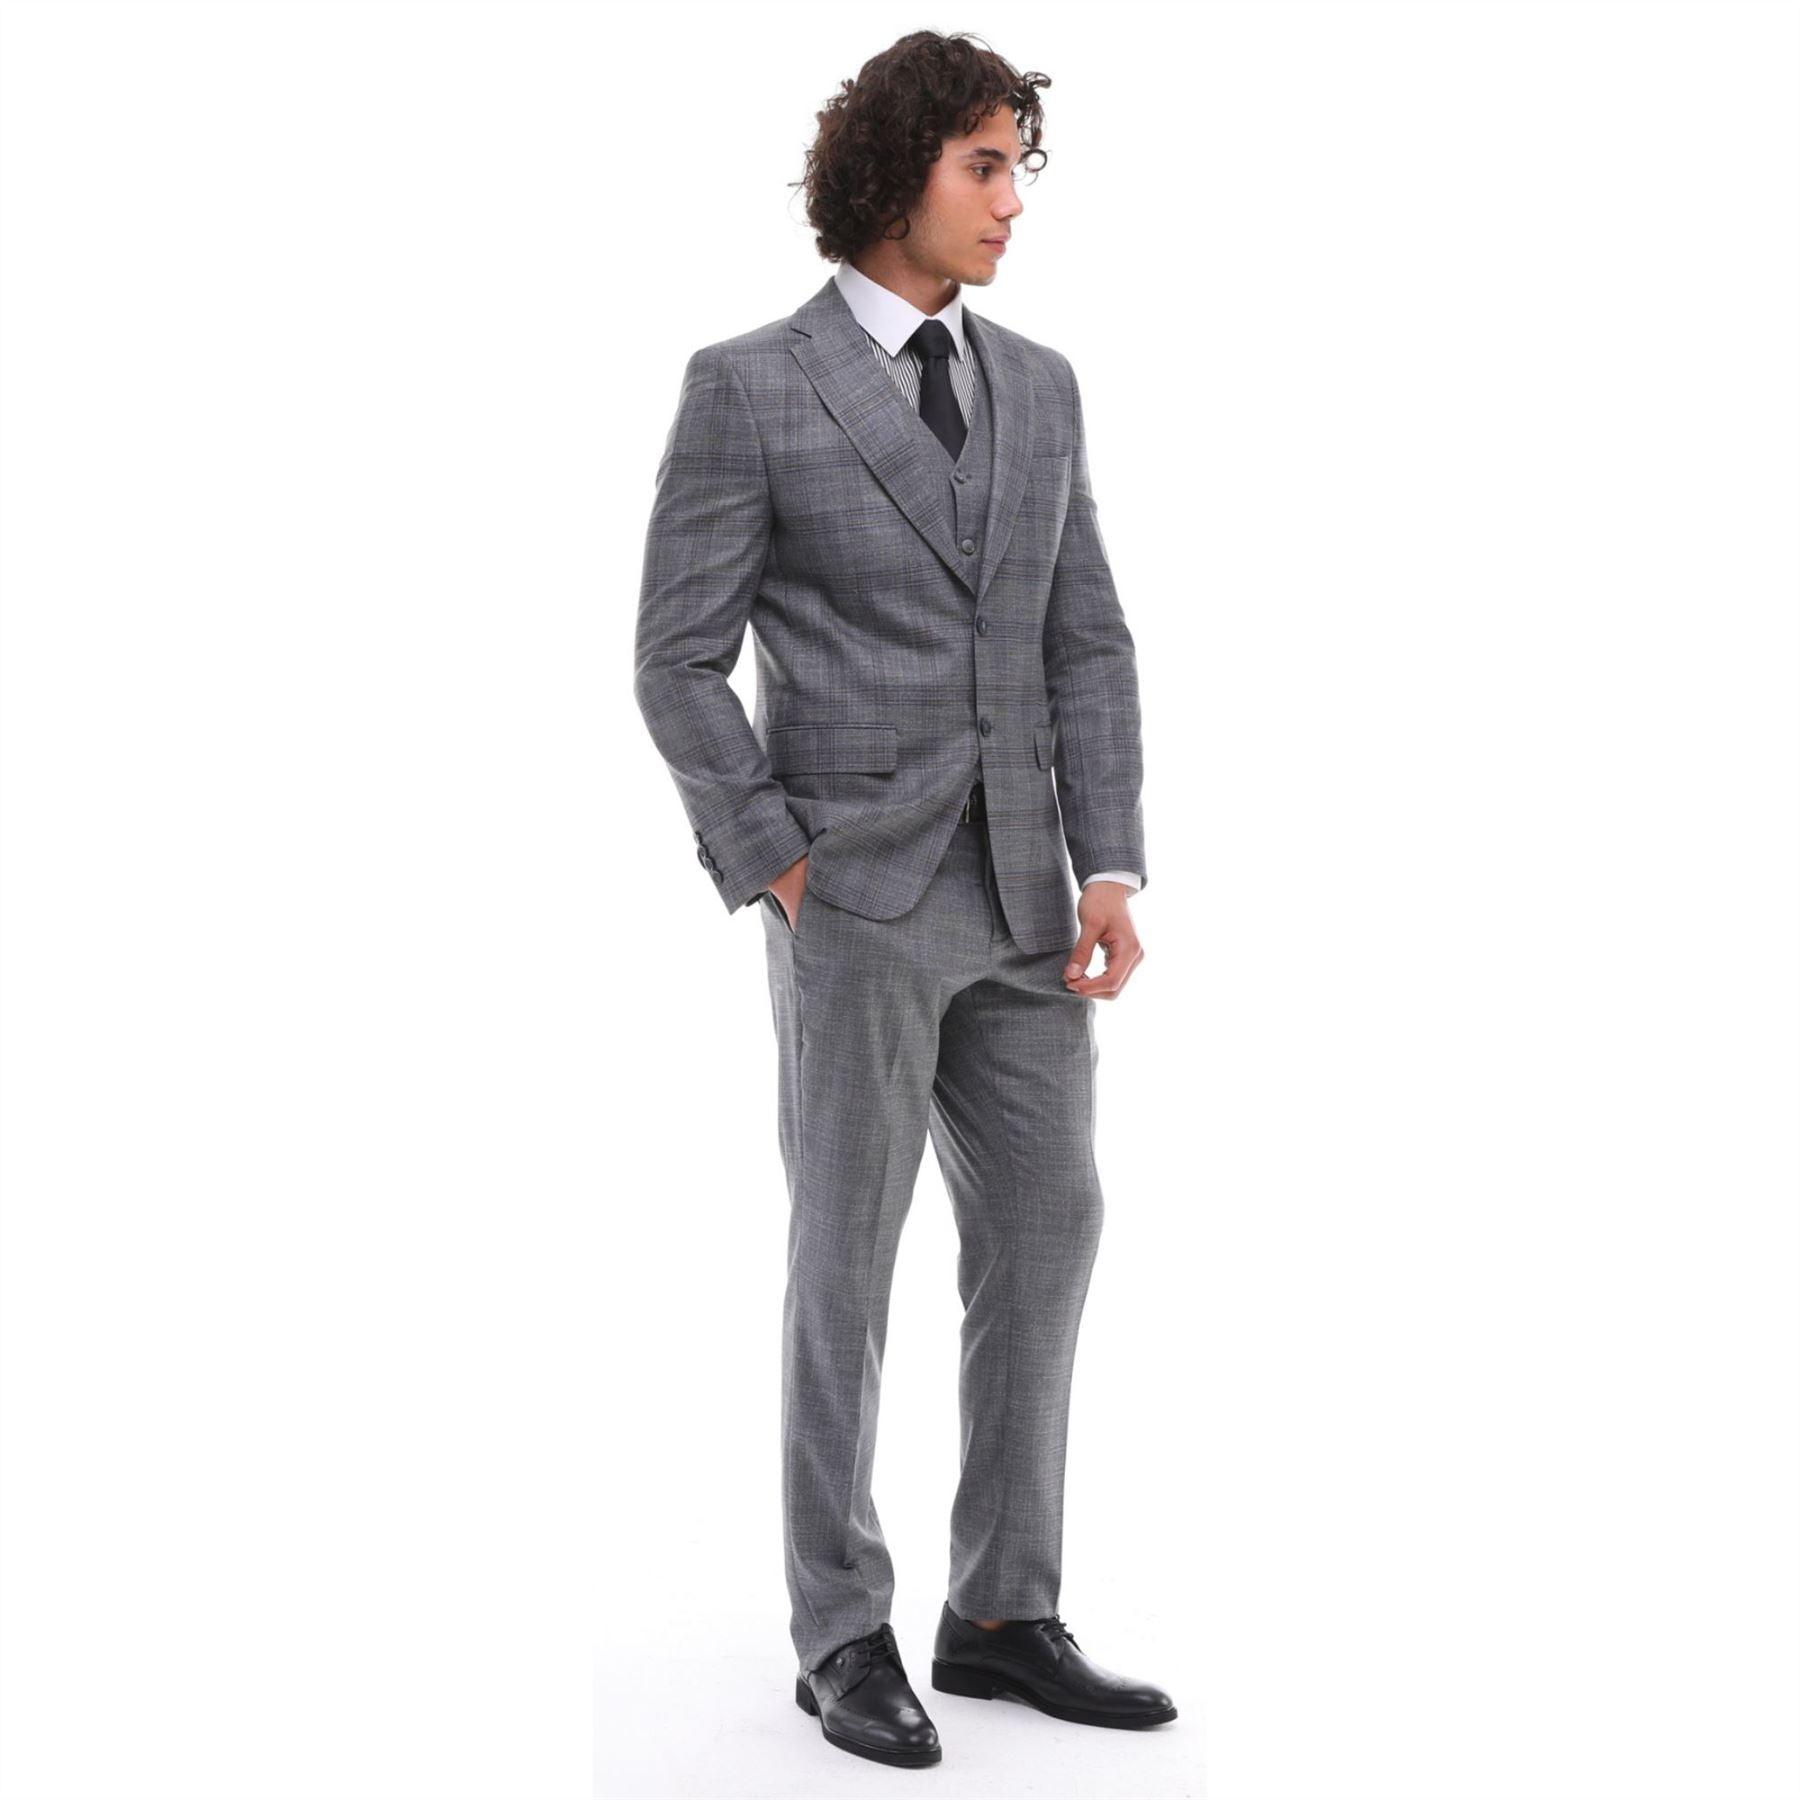 Mens 3 Piece Suit Grey Blue Check Contrasting Waistcoat Trouser Wedding Prom - Knighthood Store